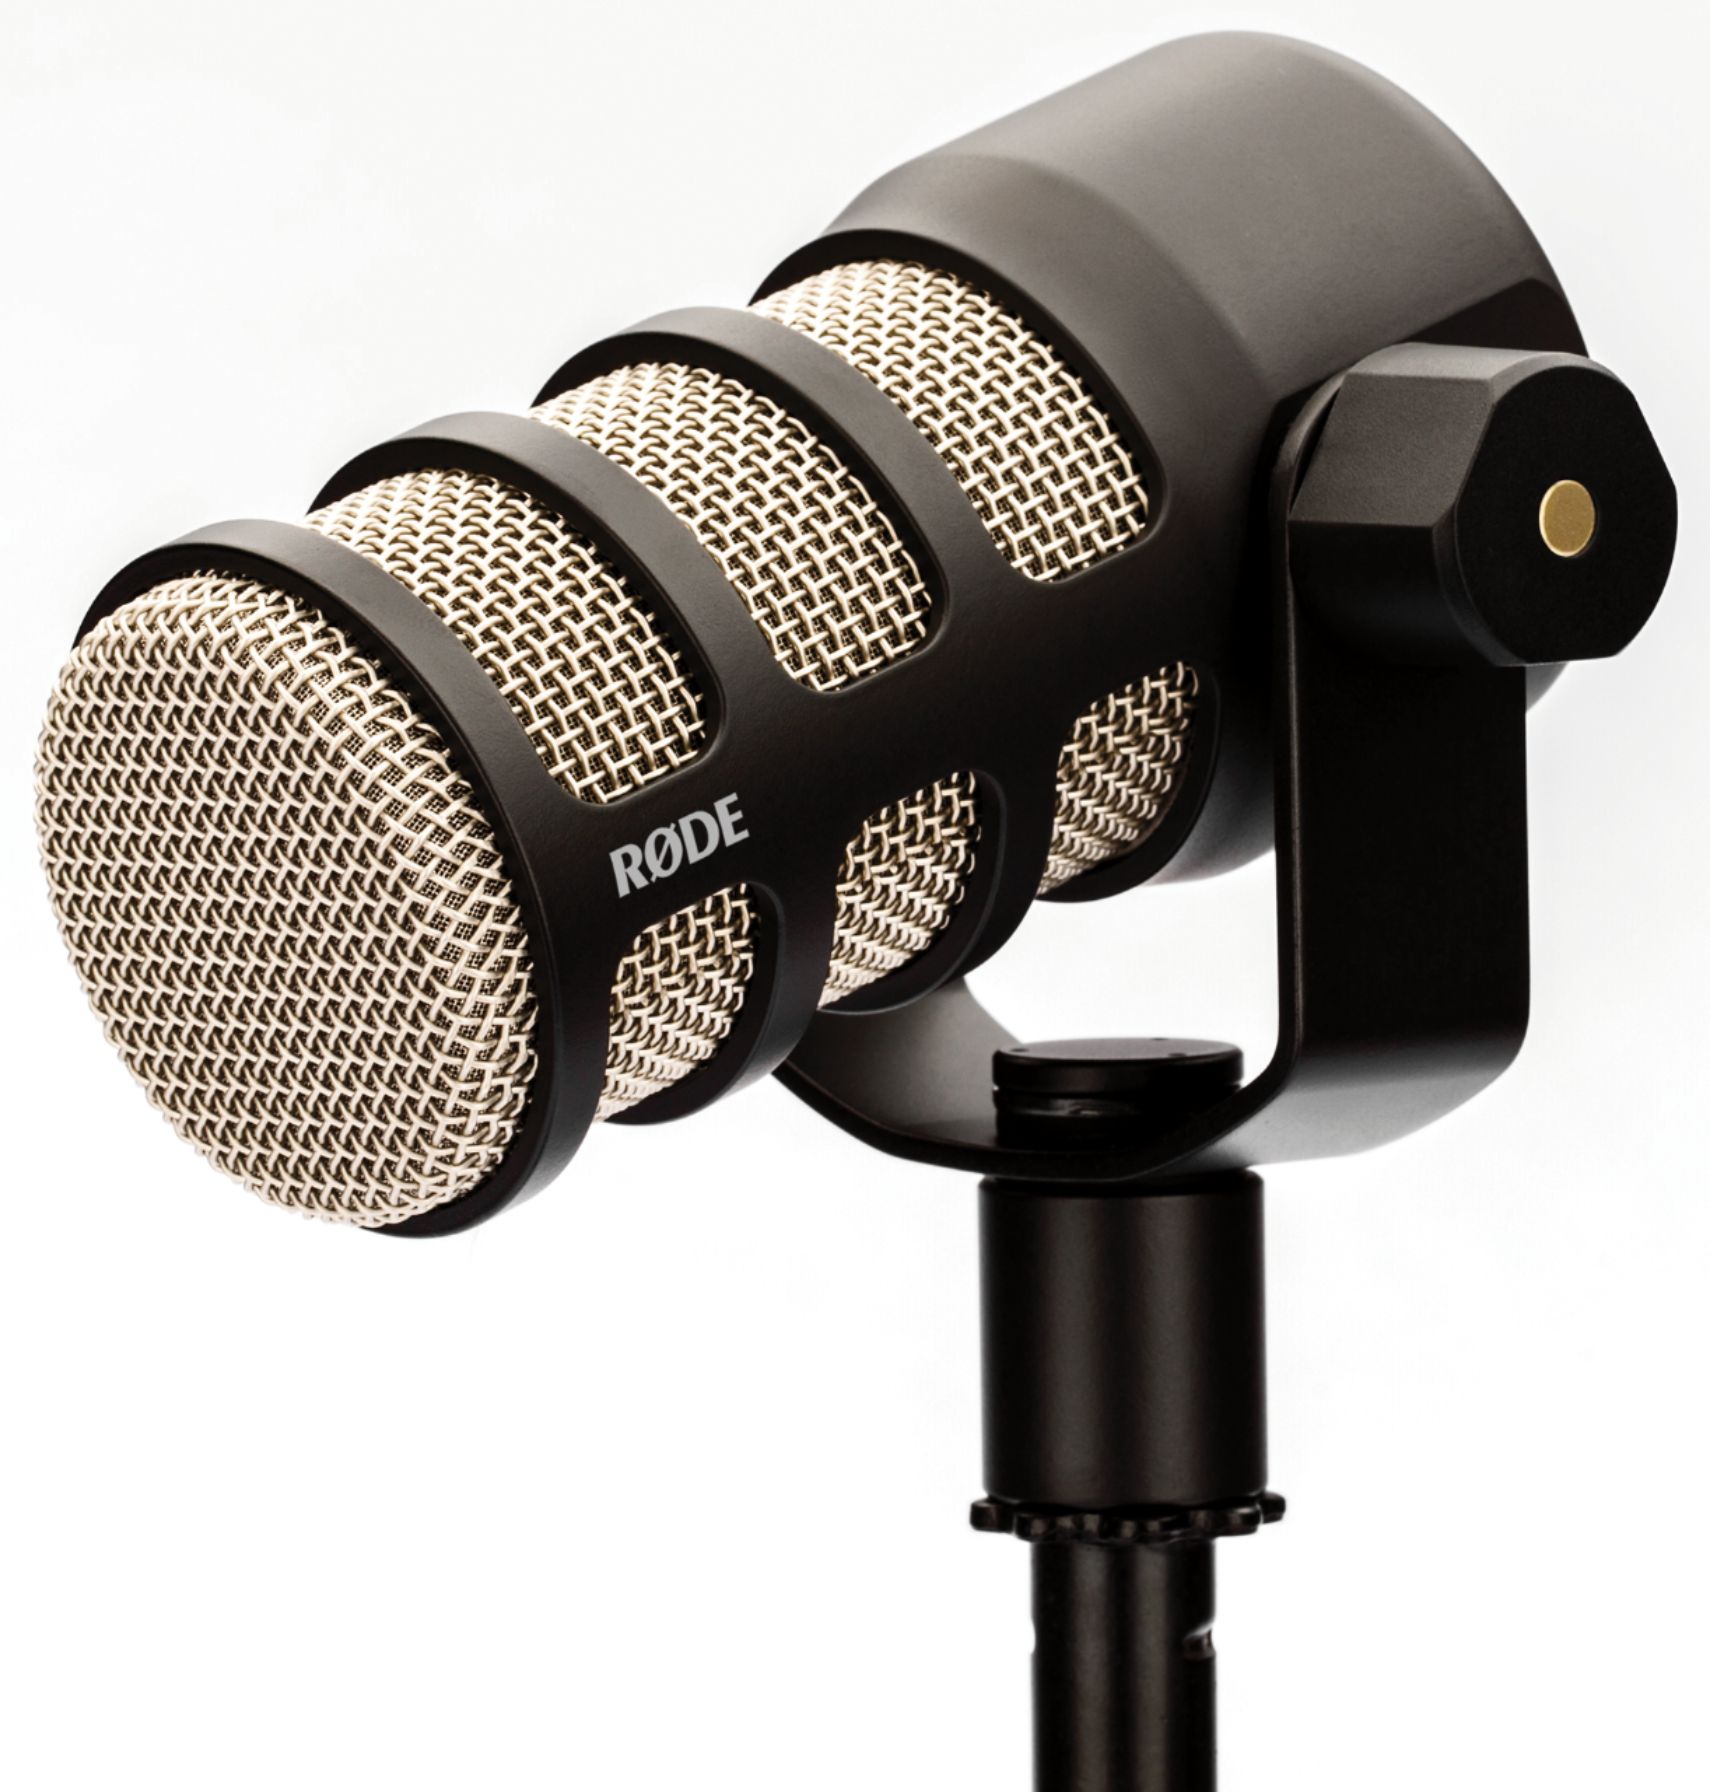 What is the best microphone for podcasting?